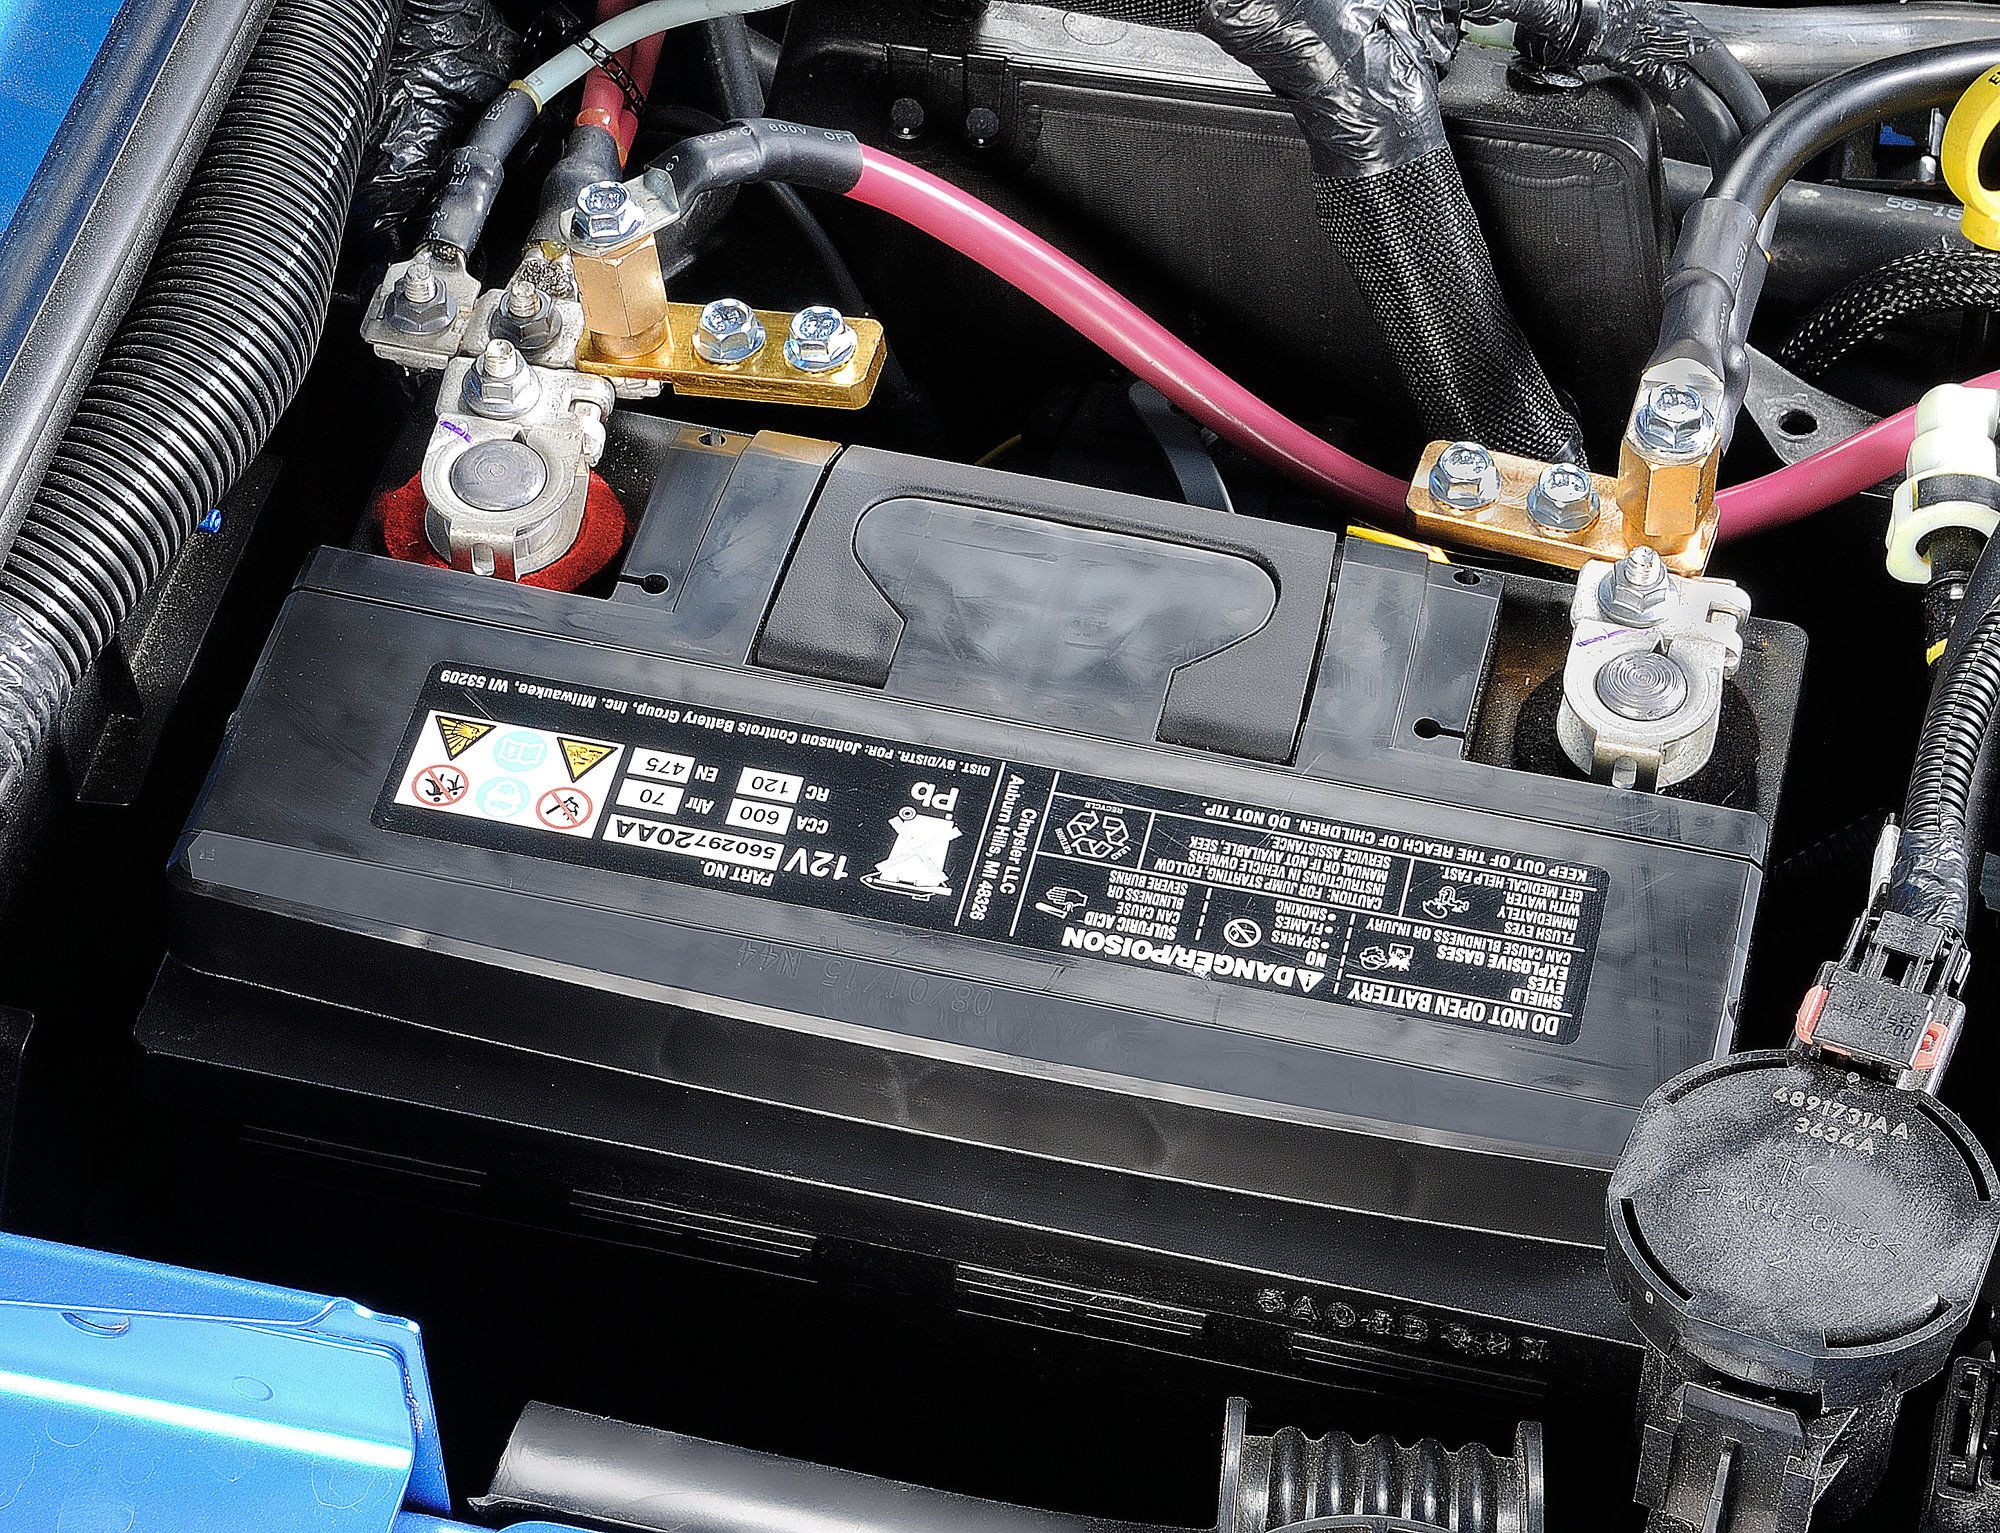 2012 Jeep Patriot Battery - Top Jeep